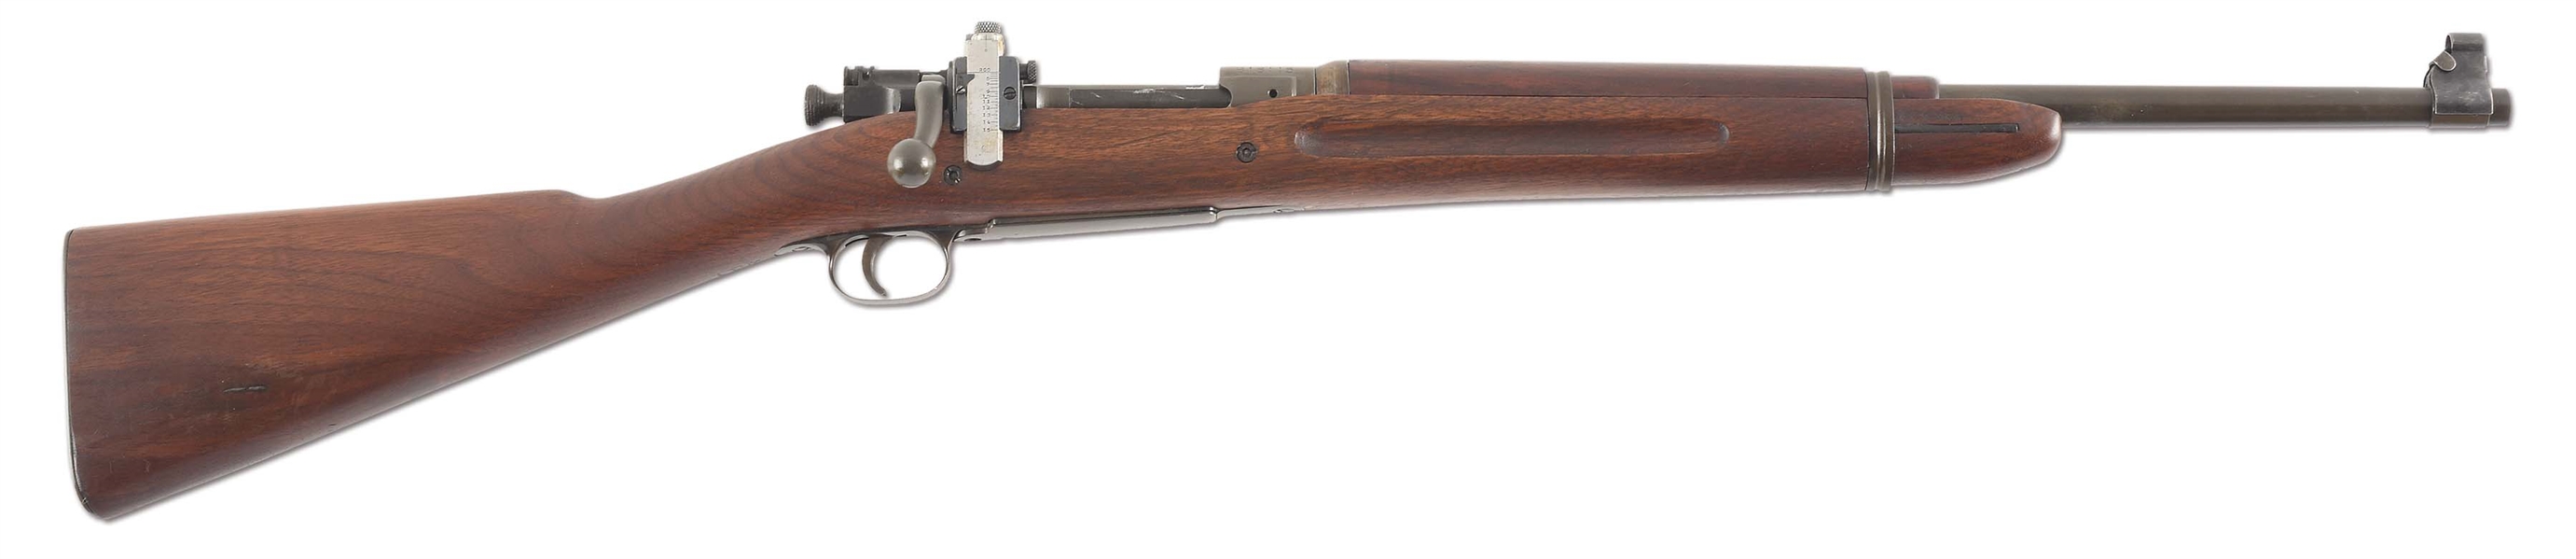 (C) EXTREMELY RARE SPRINGFIELD MODEL 1903 BOLT ACTION CARBINE.